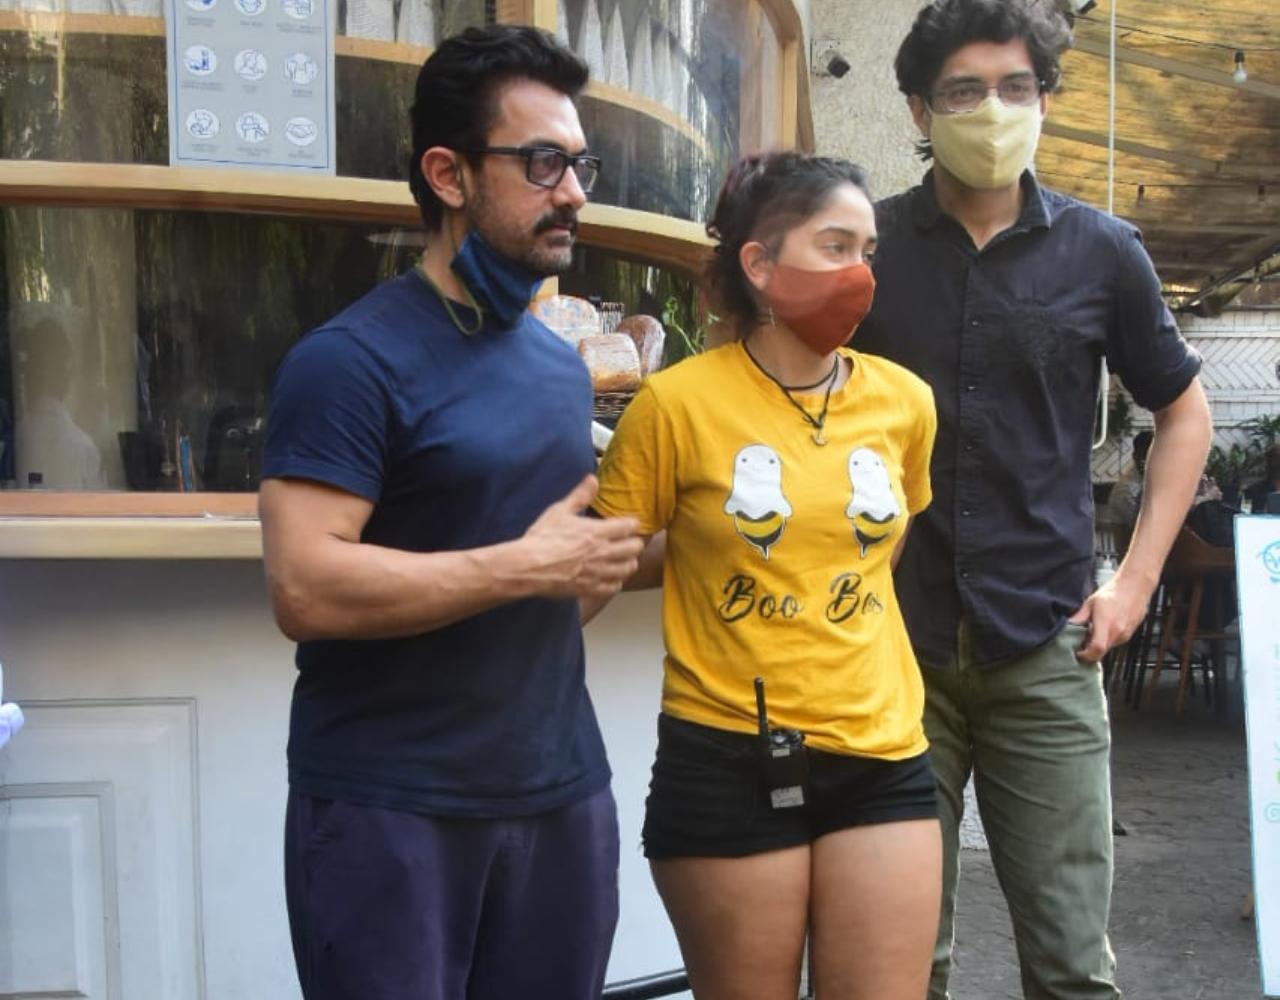 However, it was Junaid who stole the attention. The star kid has undergone a massive transformation. Junaid has lost a lot of weight and he looked unrecognizable in the latest pictures. He opted for a black shirt and pants for the outing.